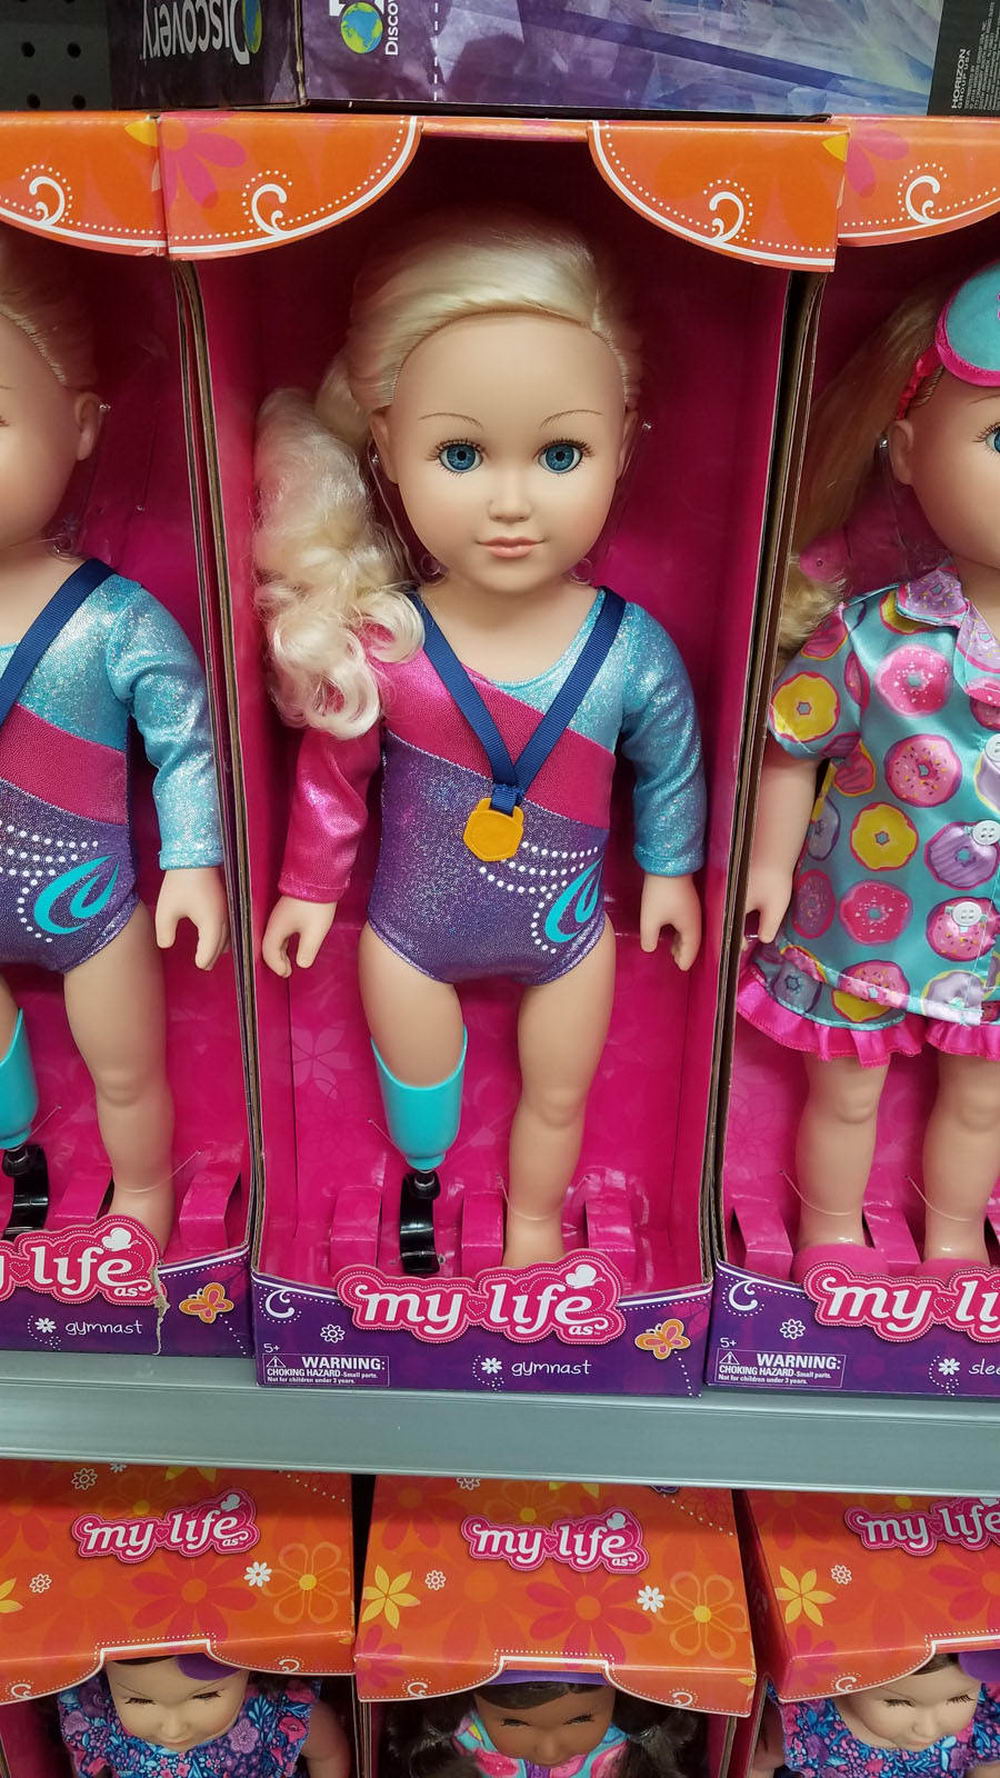 toddler - Disco Liant my l as my life ase gymnast A Warning Xs Choking Hazards Naller under a Warning Choking Hazard Small parts dayan gymnast my ly my life my life